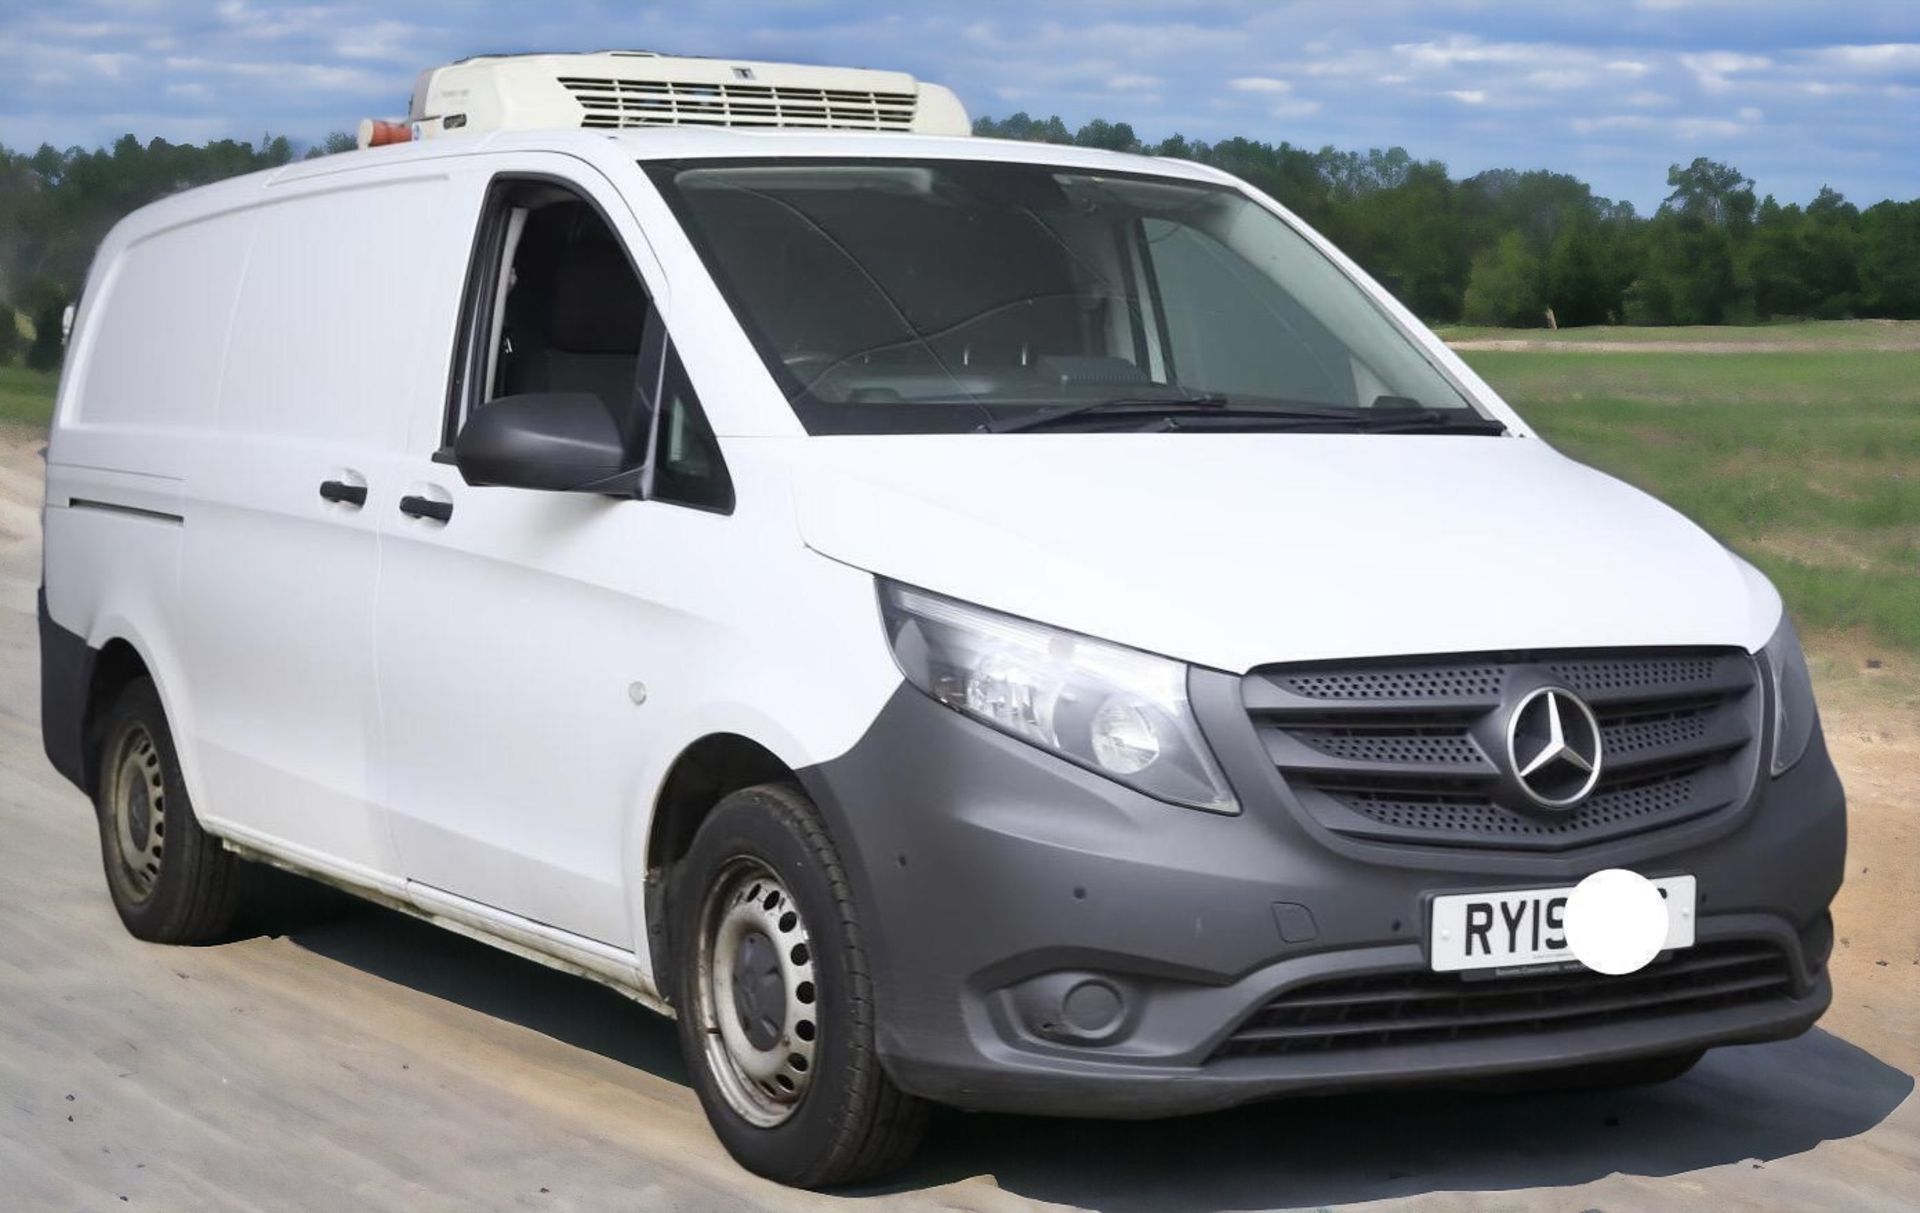 2019 MERCEDES BENZ VITO LWB FRIDGE VAN 114 CDI - YOUR RELIABLE REFRIGERATED SOLUTION